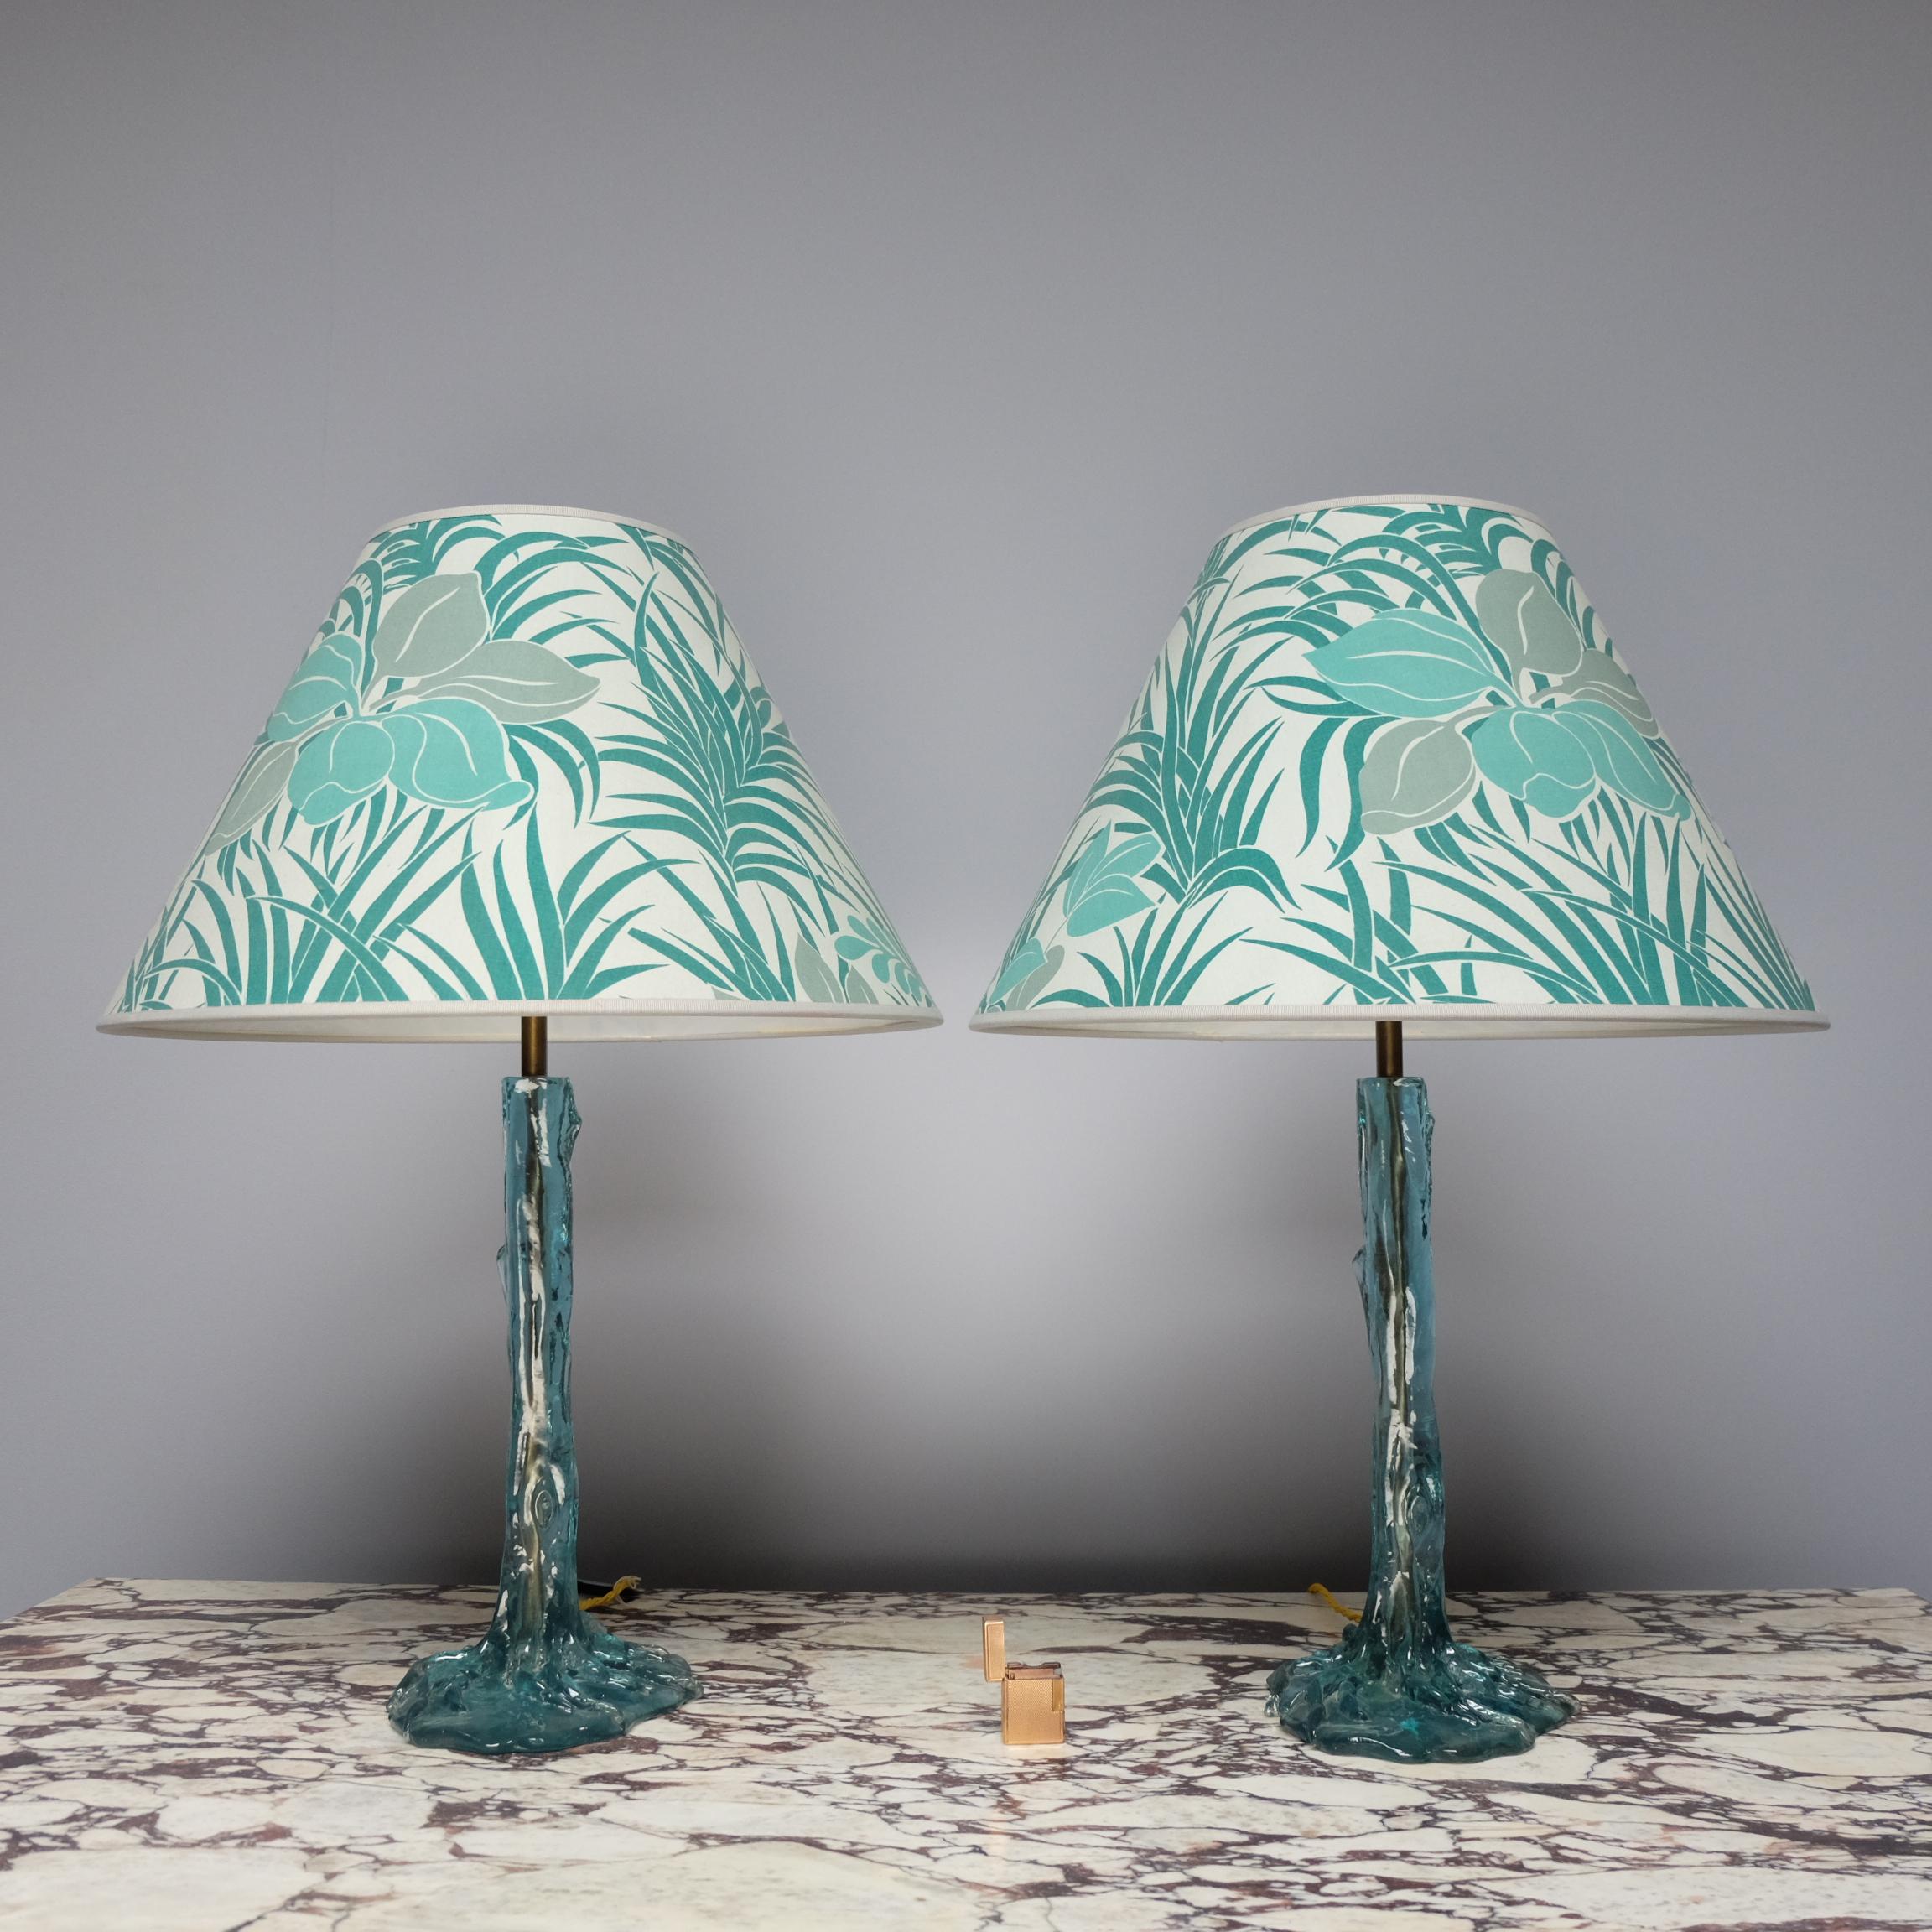 Pair of 1970s turquoise resin table lamps formed in the shape of a tree and roots. A brass rod runs through their centres where the wires are hidden. Their original conical shades feature turquoise flowers and palm leaves against a white background.